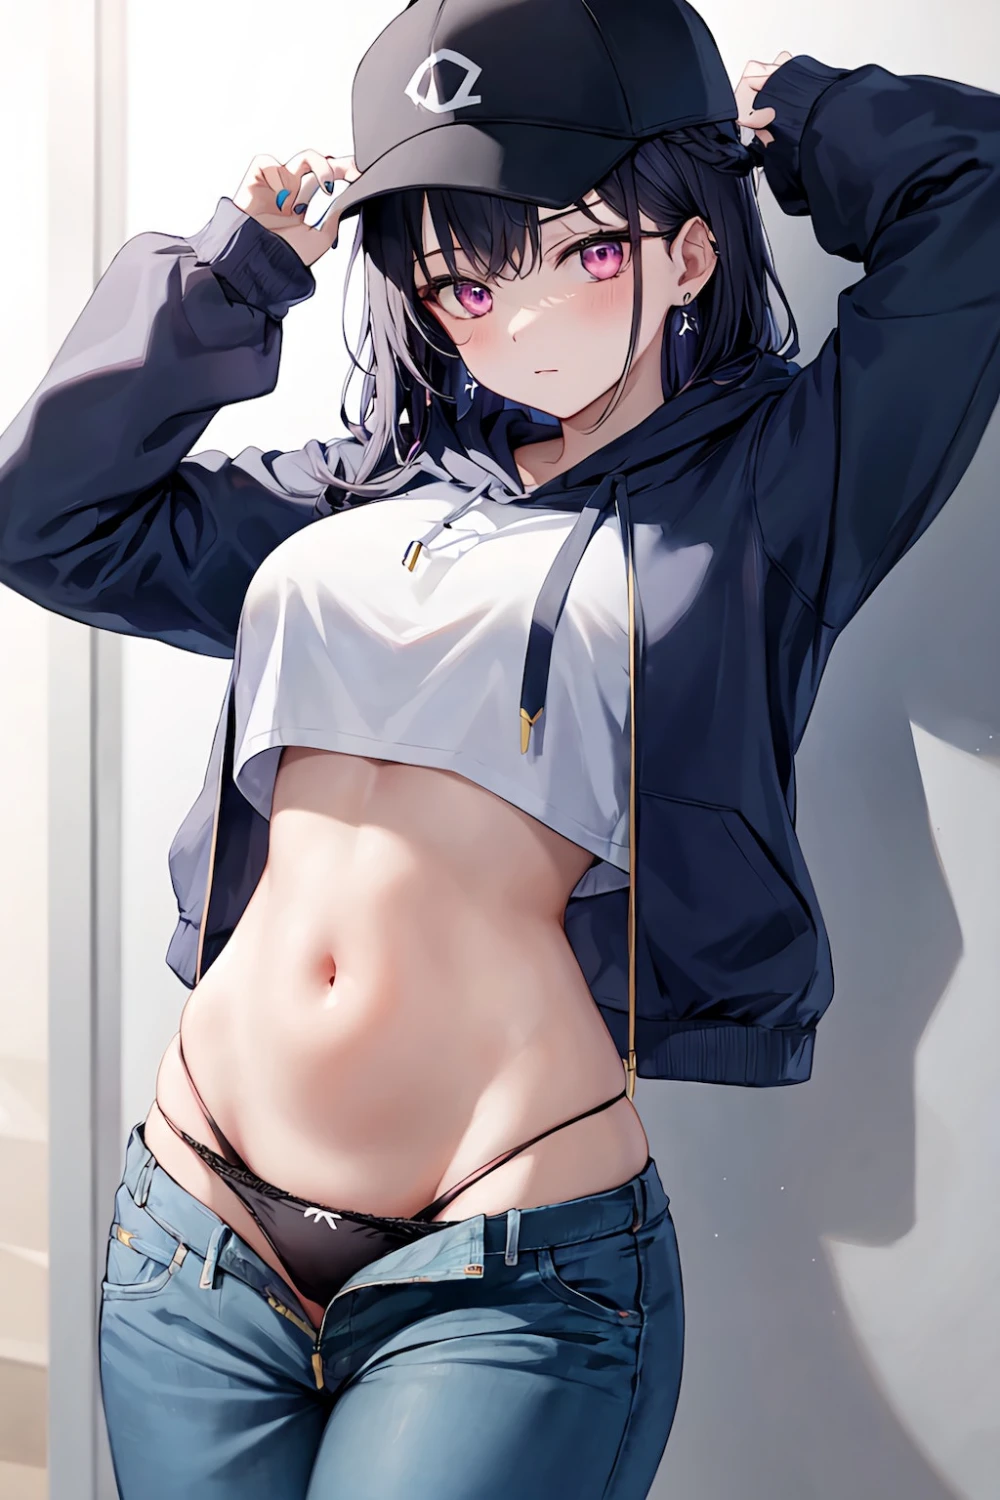 midriff-anime-style-all-ages-1